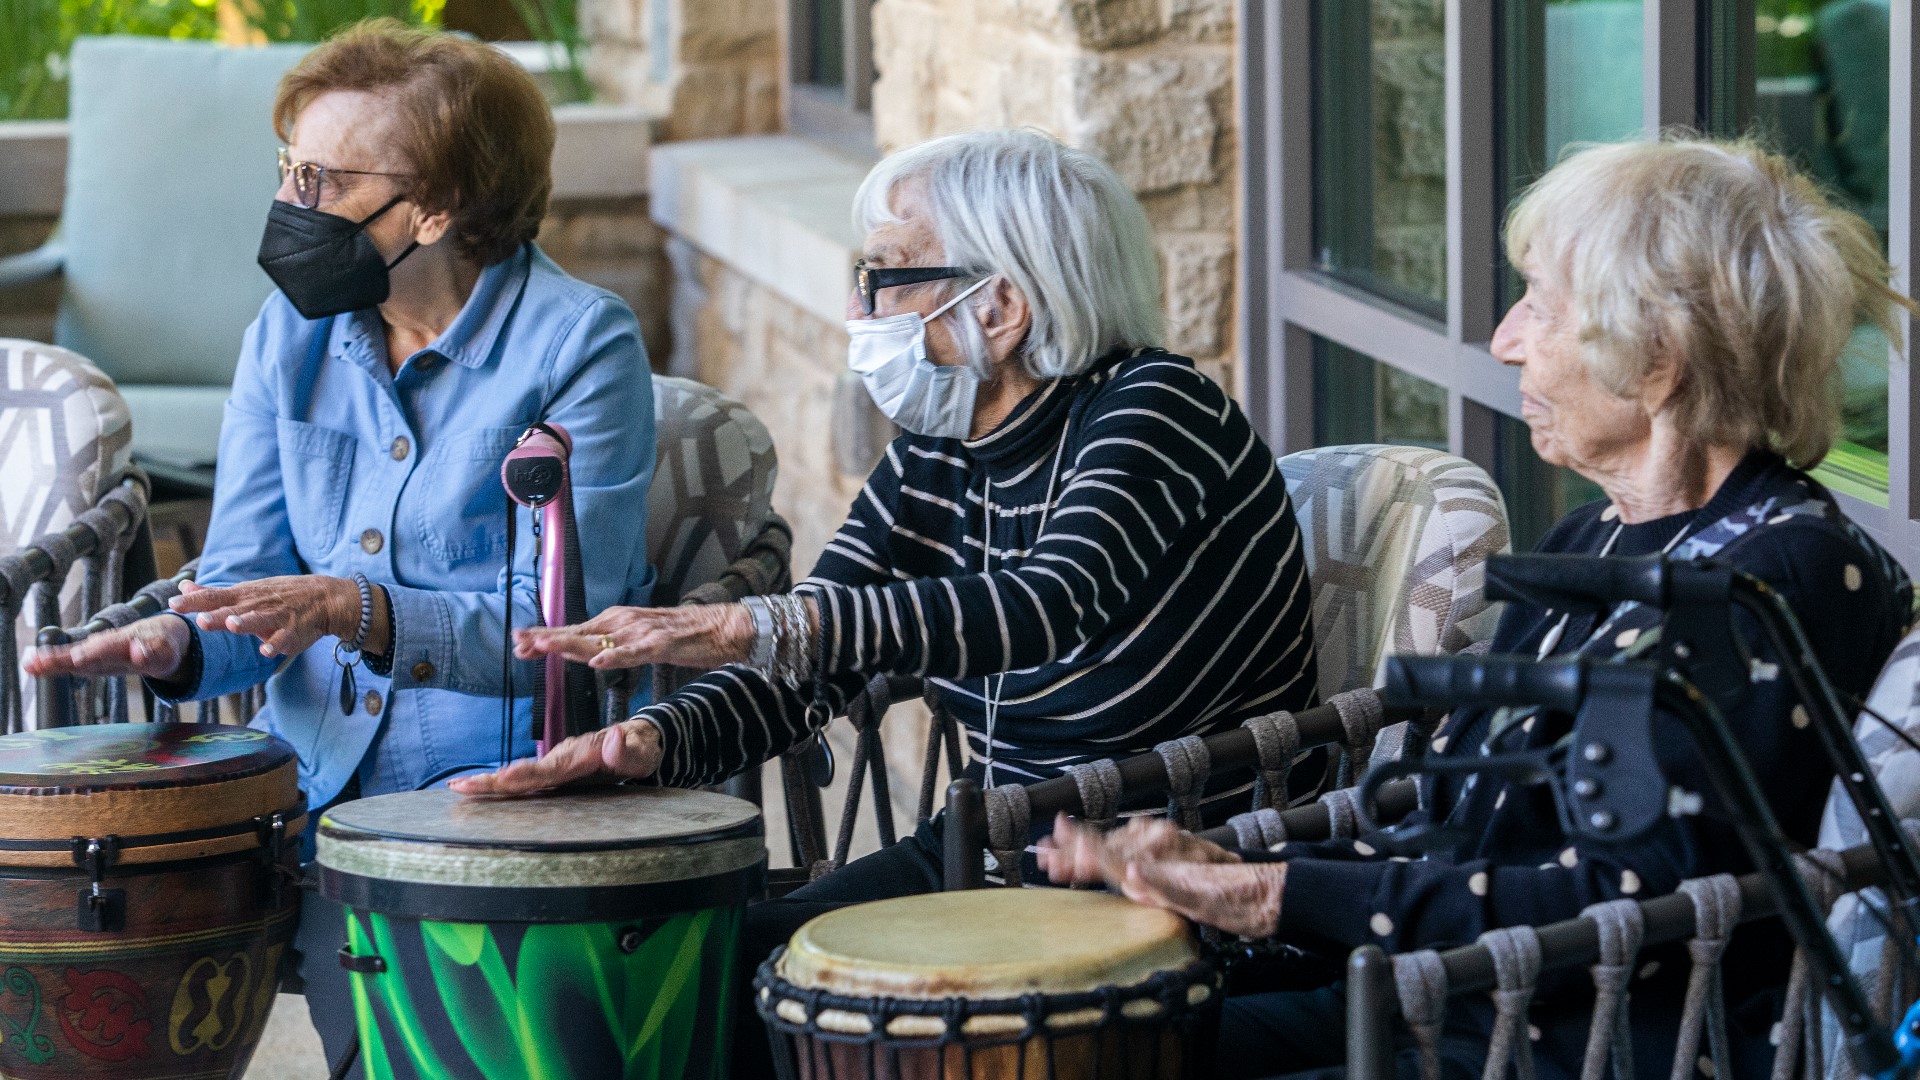 Katy Gaughan, drum circle facilitator and trainer shares with Kristen and Ellen how drumming can help your mental health.